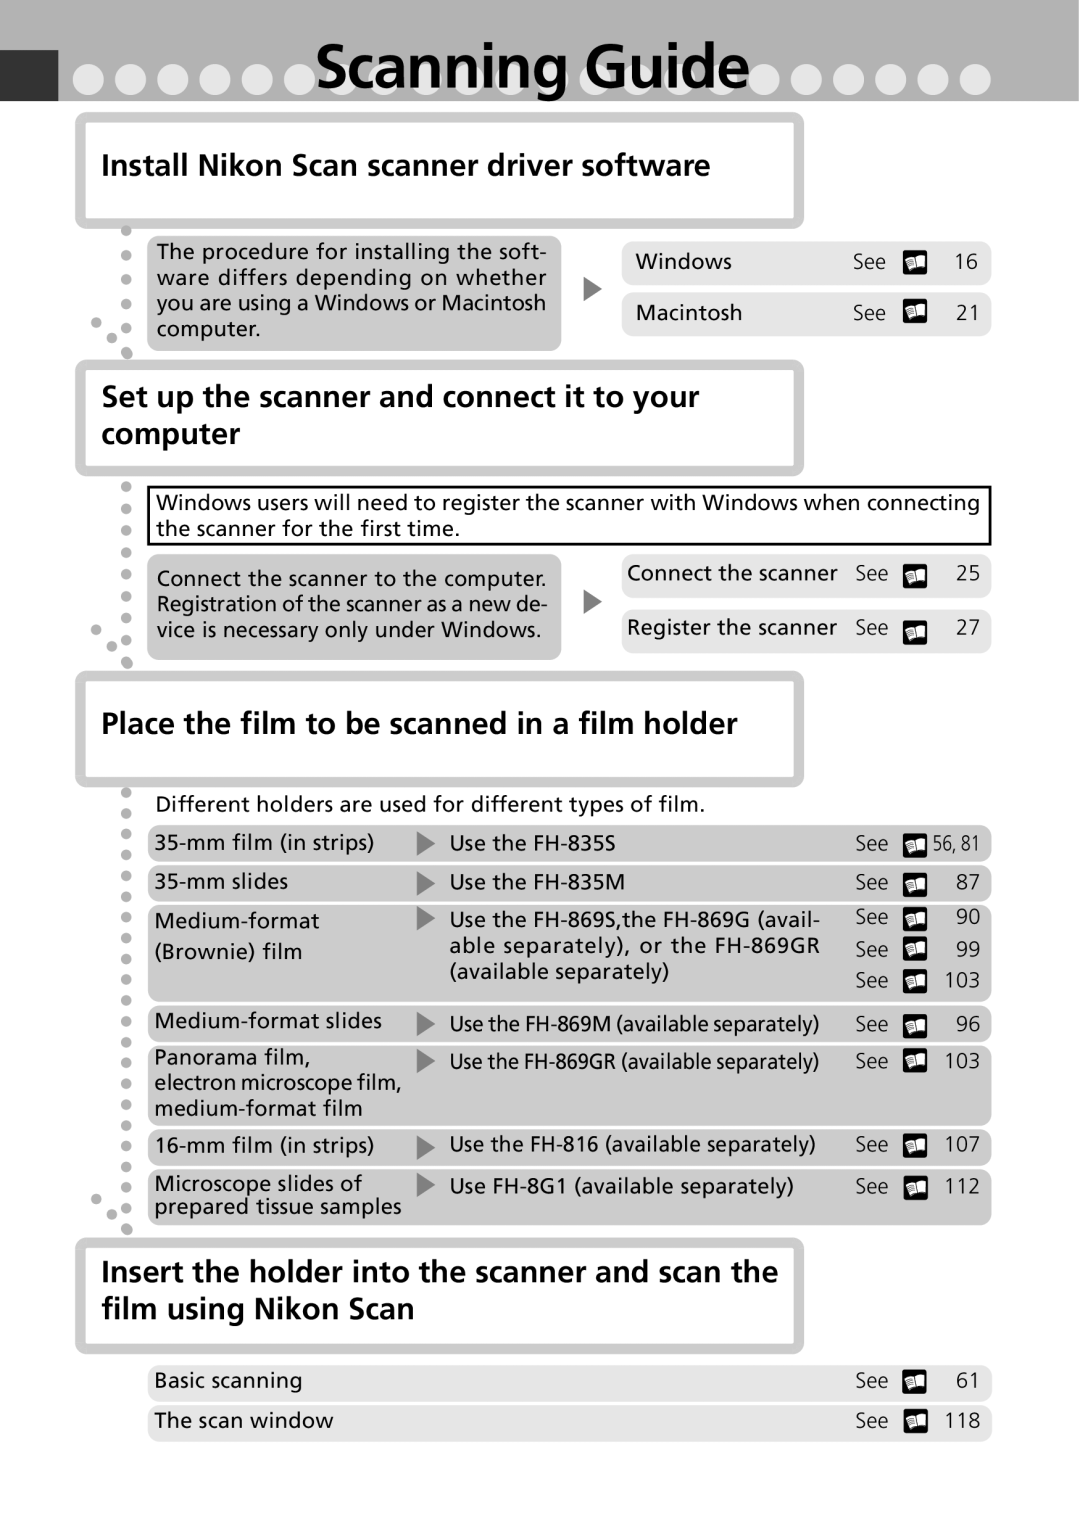 Nikon LS8000 Scanning Guide, Install Nikon Scan scanner driver software, Place the film to be scanned in a film holder 